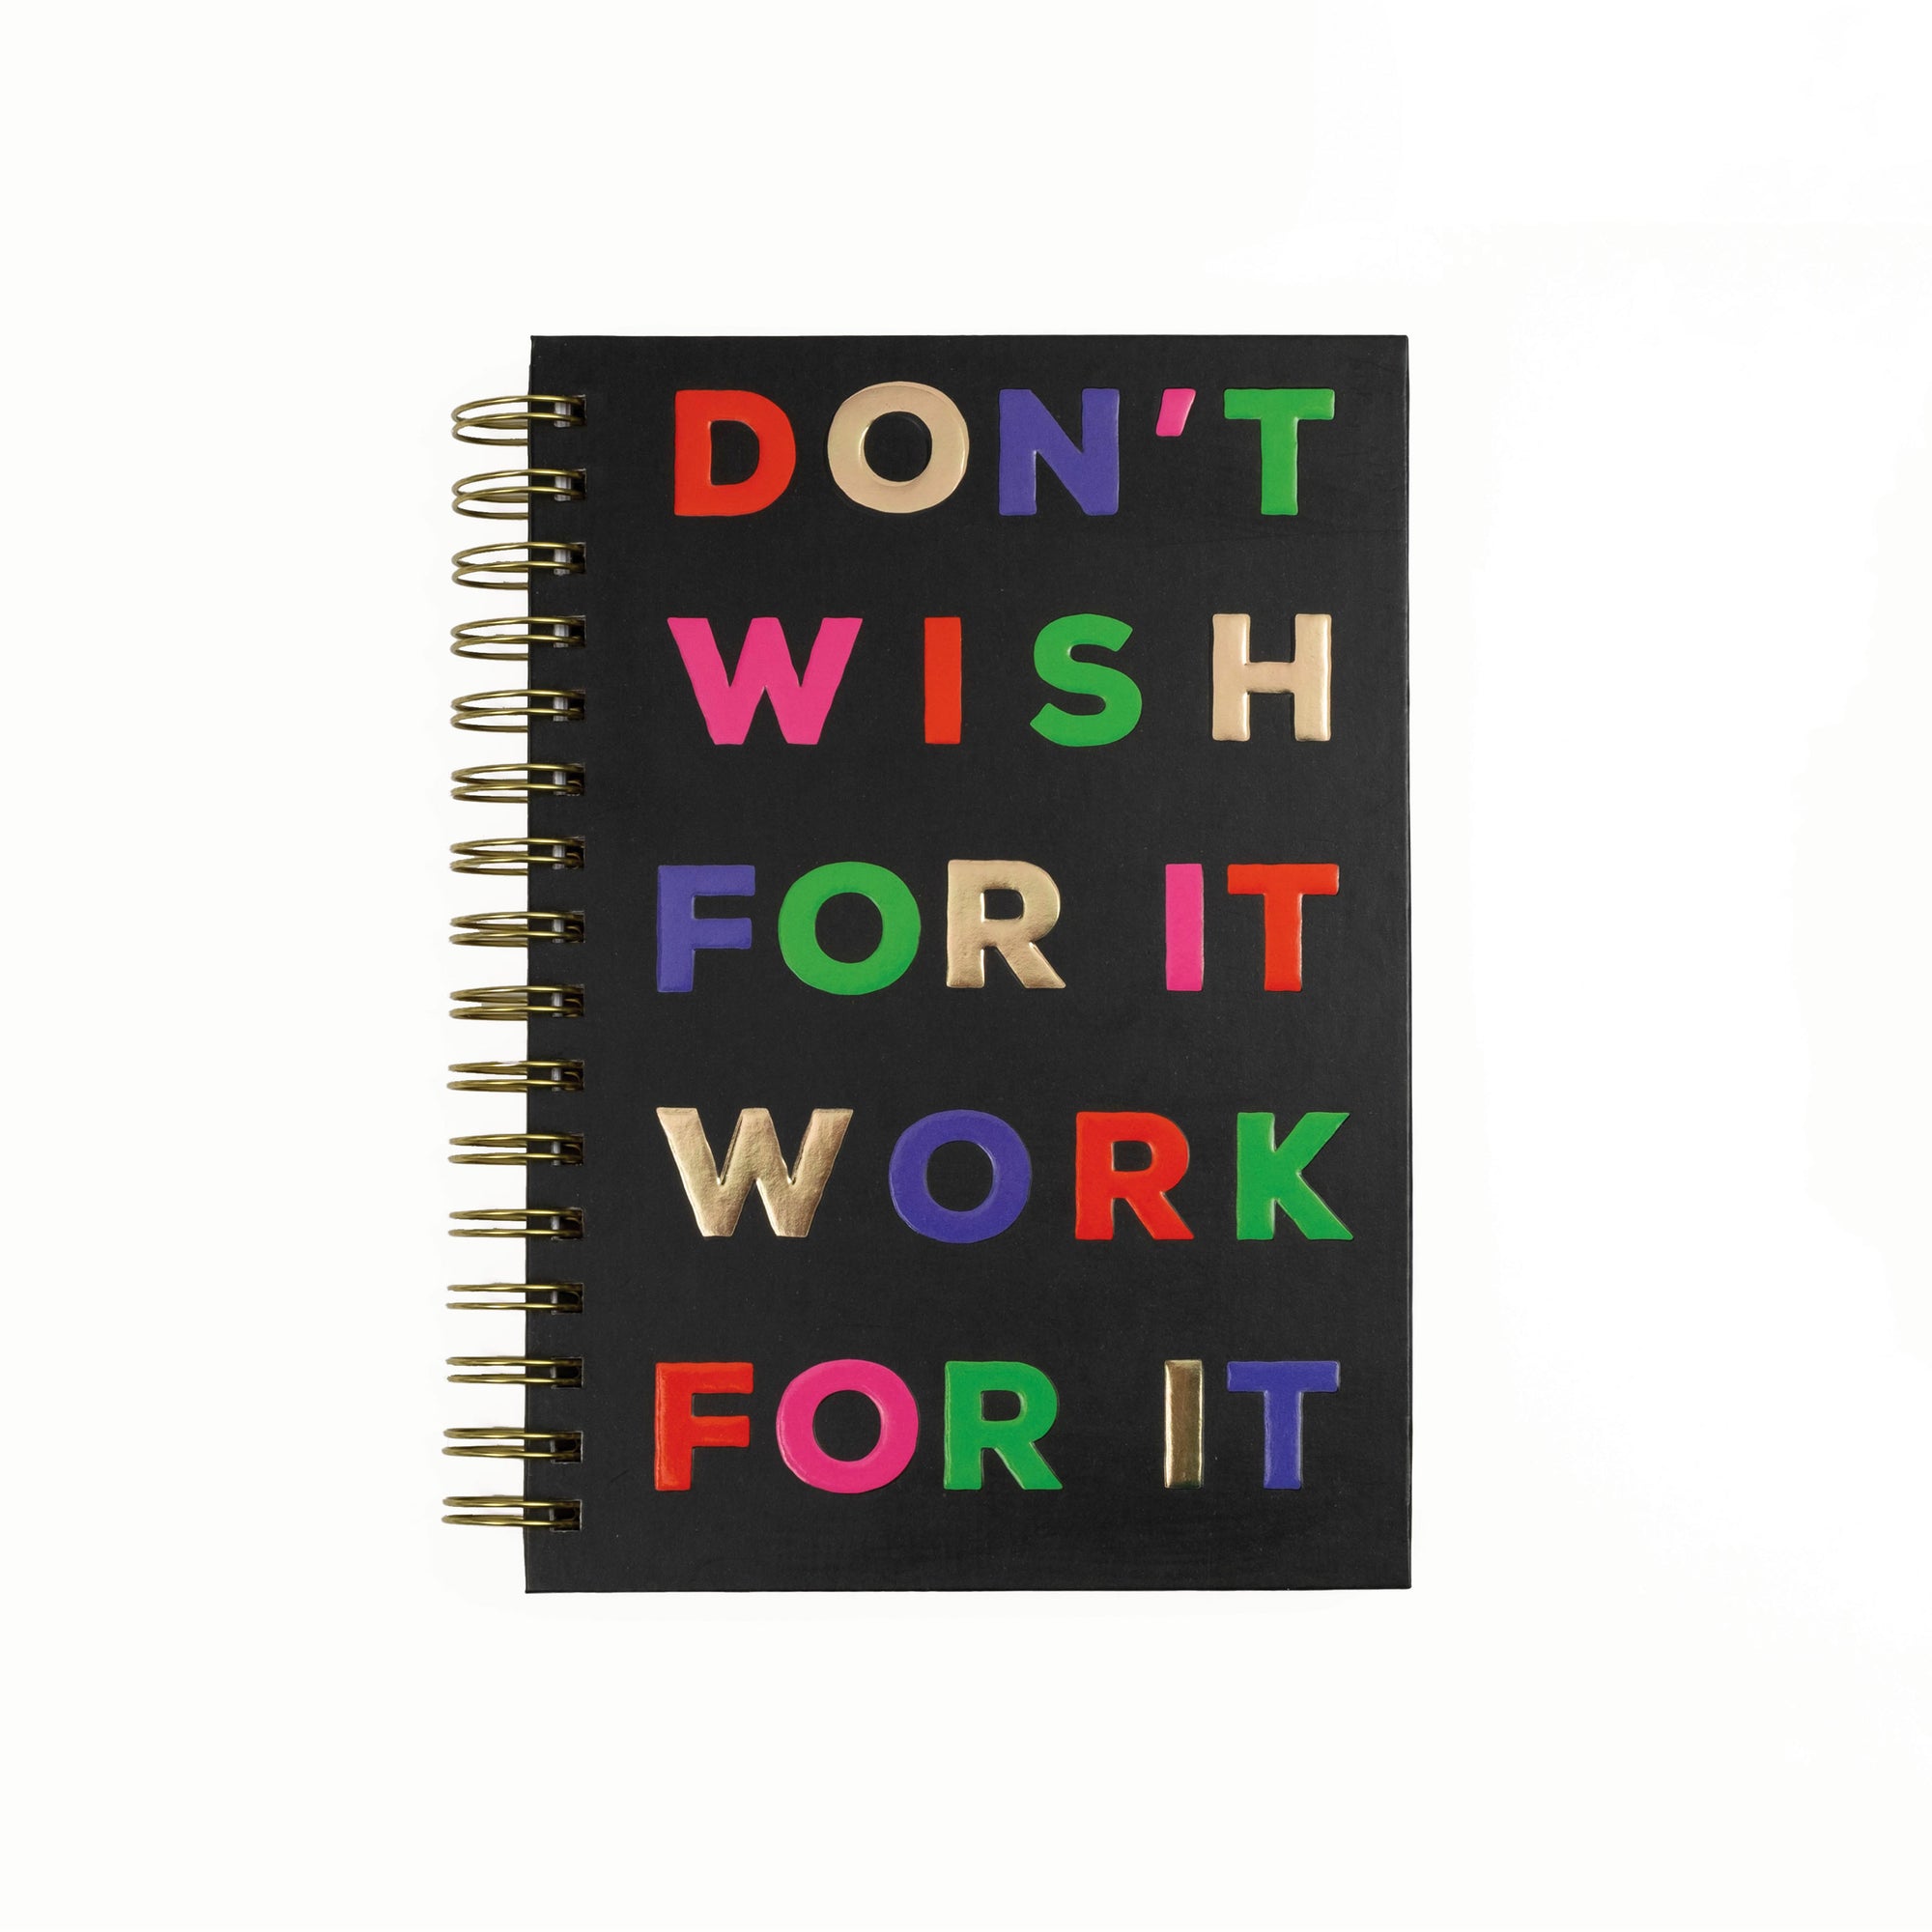 Don't Wish For It Work For It Spiral Notebook